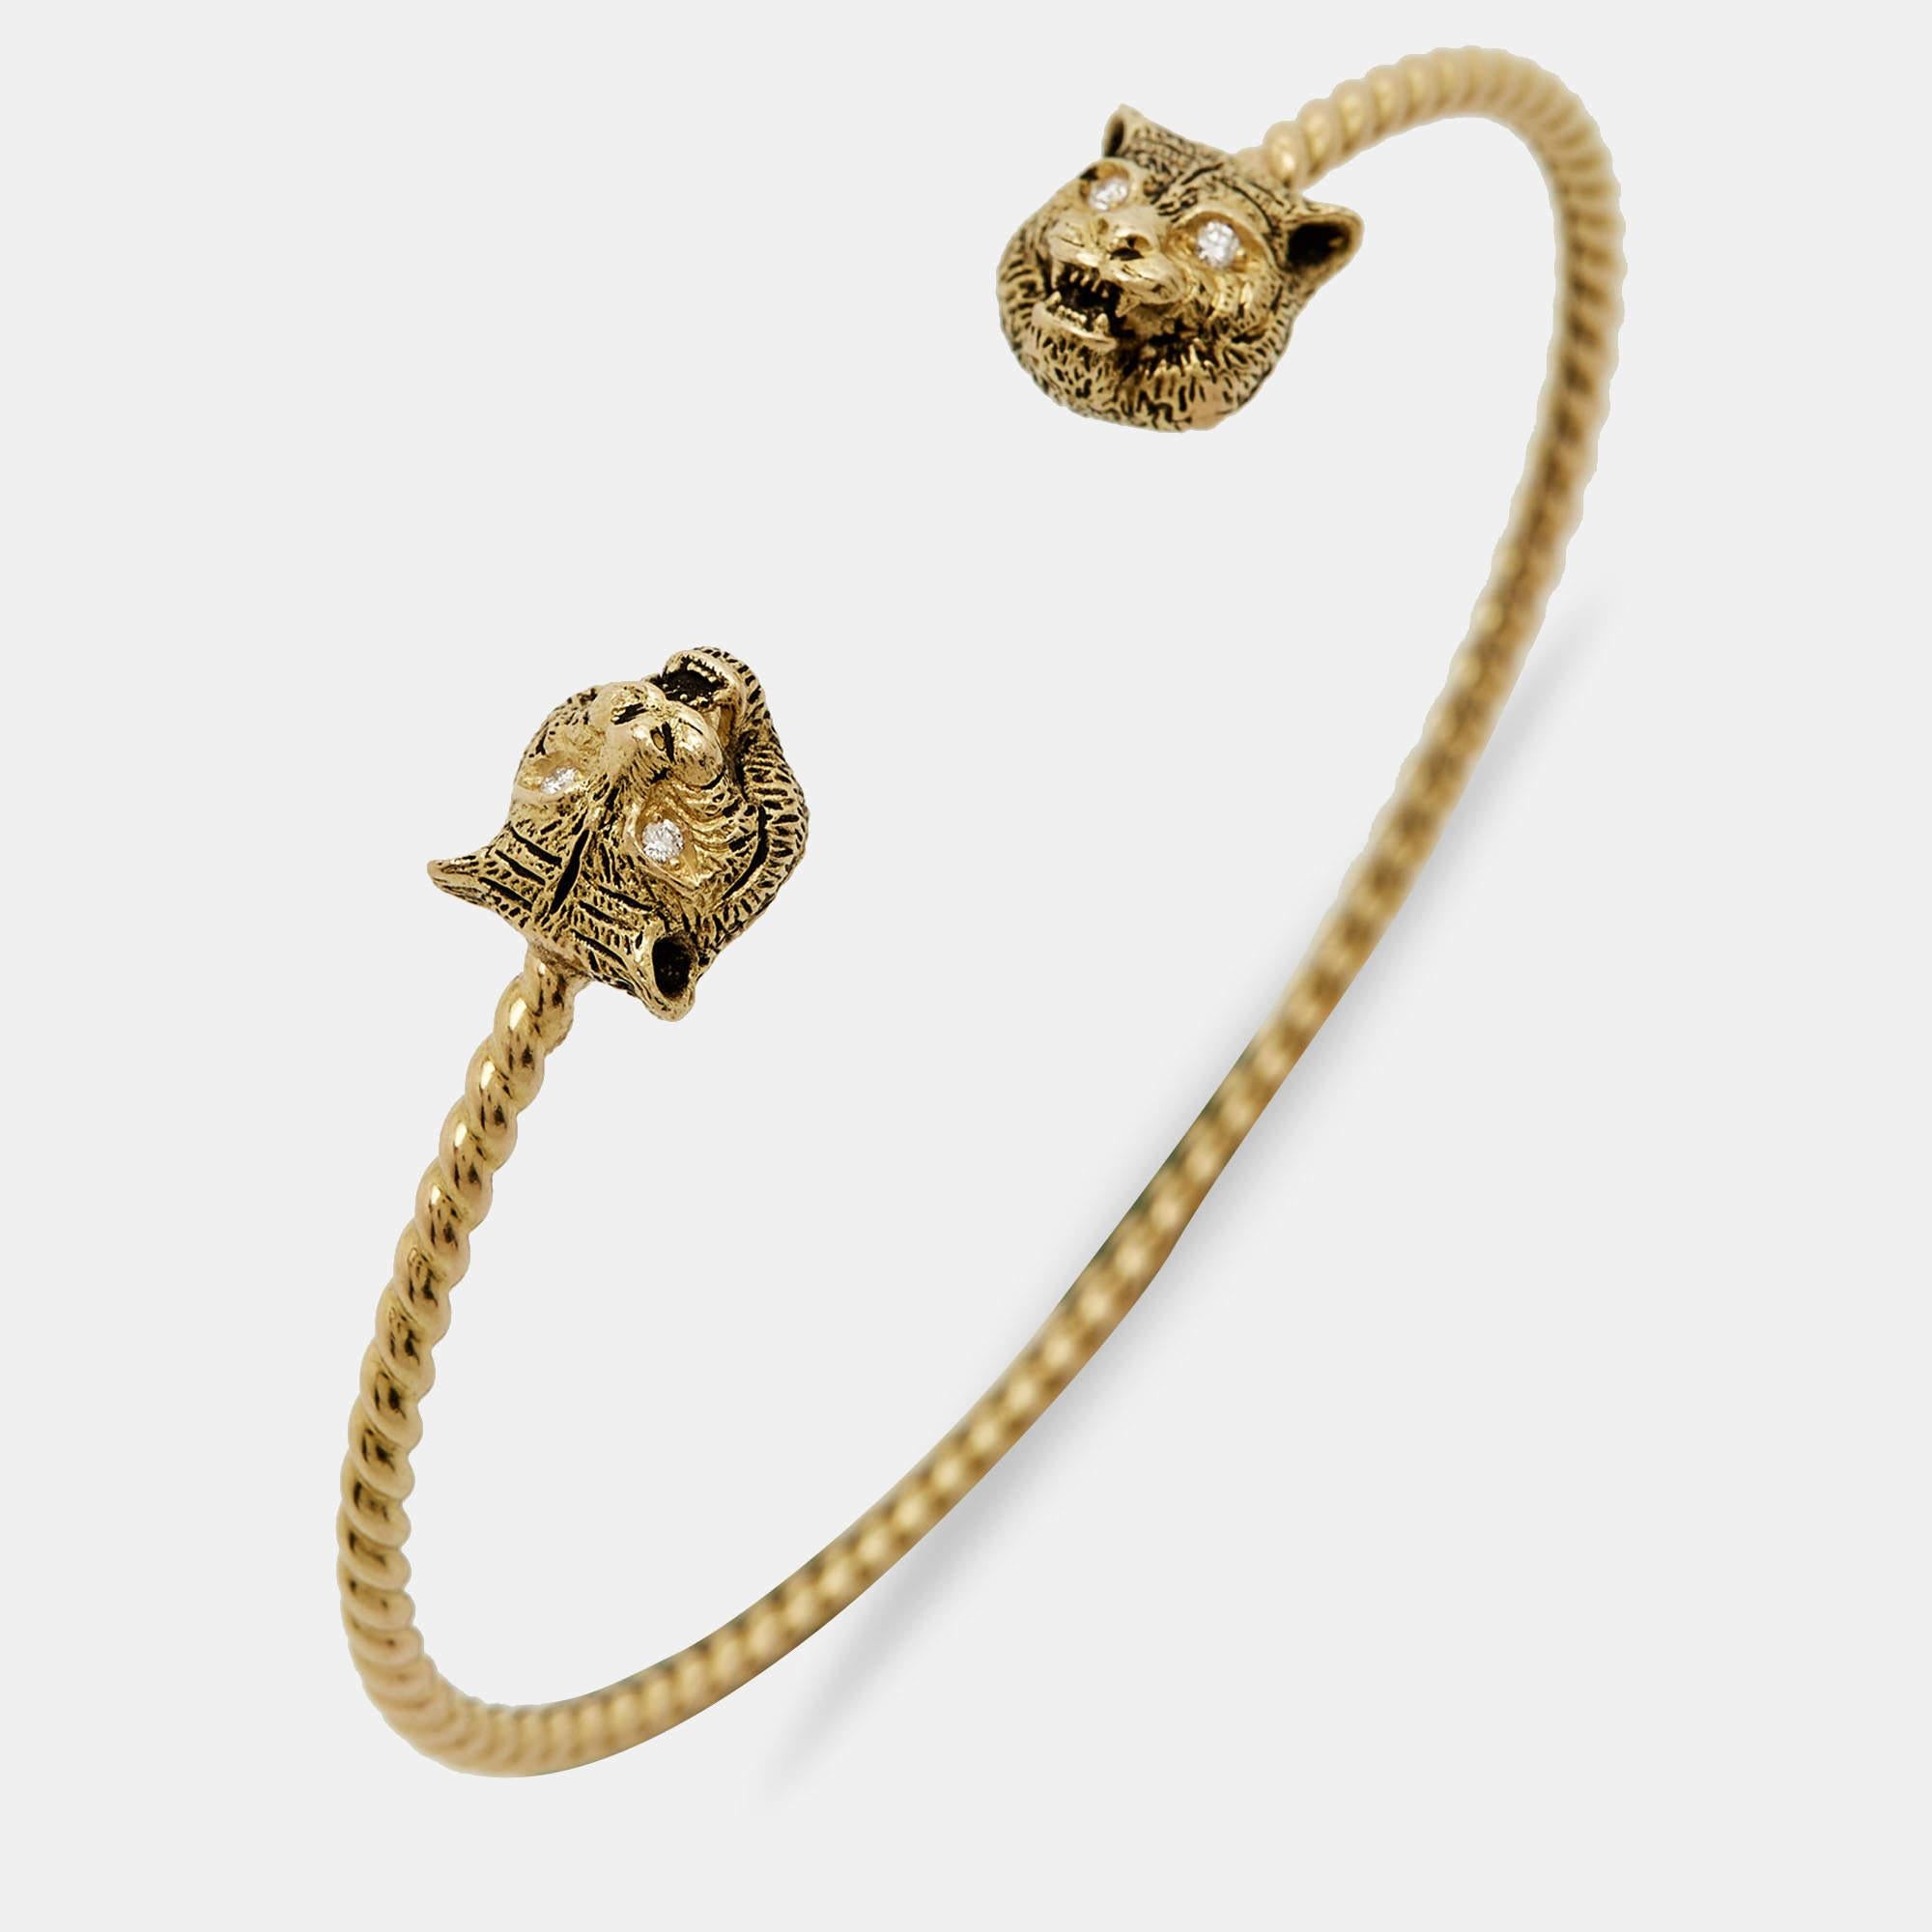 The Gucci Marche des Merveilles cuff bracelet is a luxurious and captivating piece of jewelry. Crafted from 18K yellow gold, it features intricate feline head motifs adorned with sparkling diamonds. The design exudes elegance and sophistication,